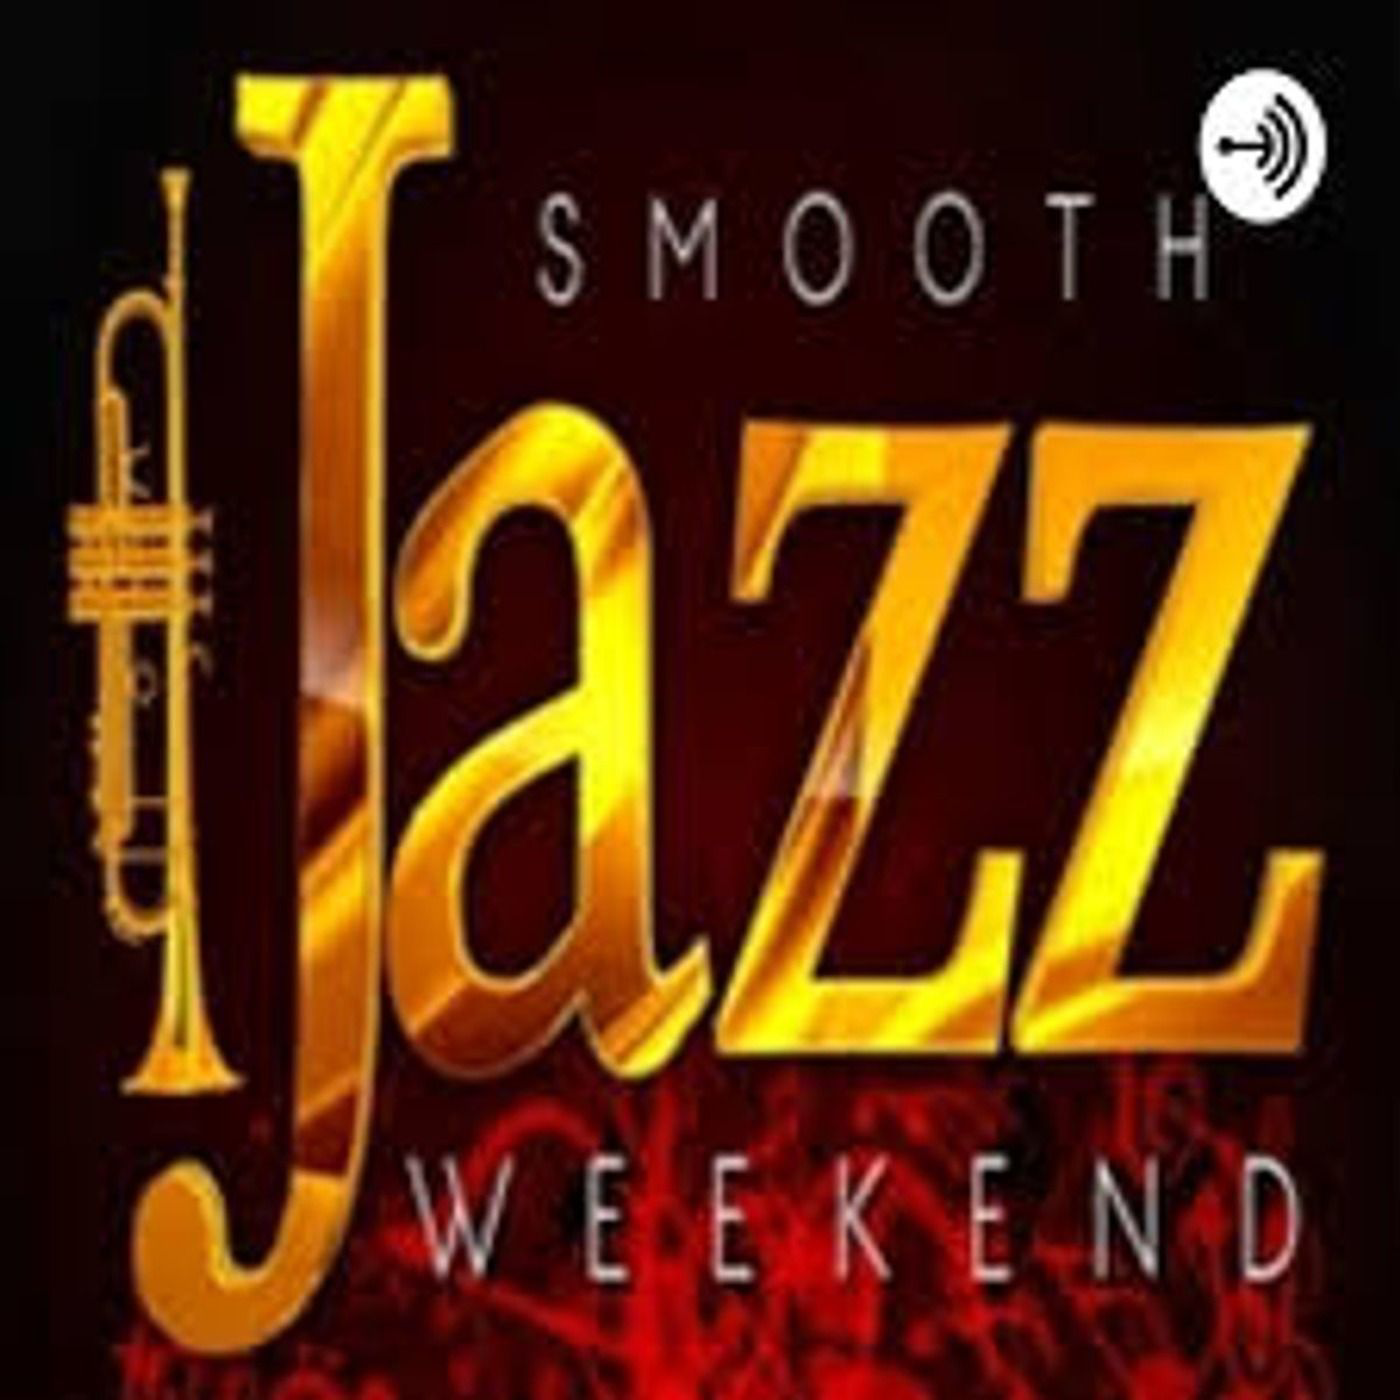 A highlight from SSmooth Jazz Weekend with Tina E. (Something About You)